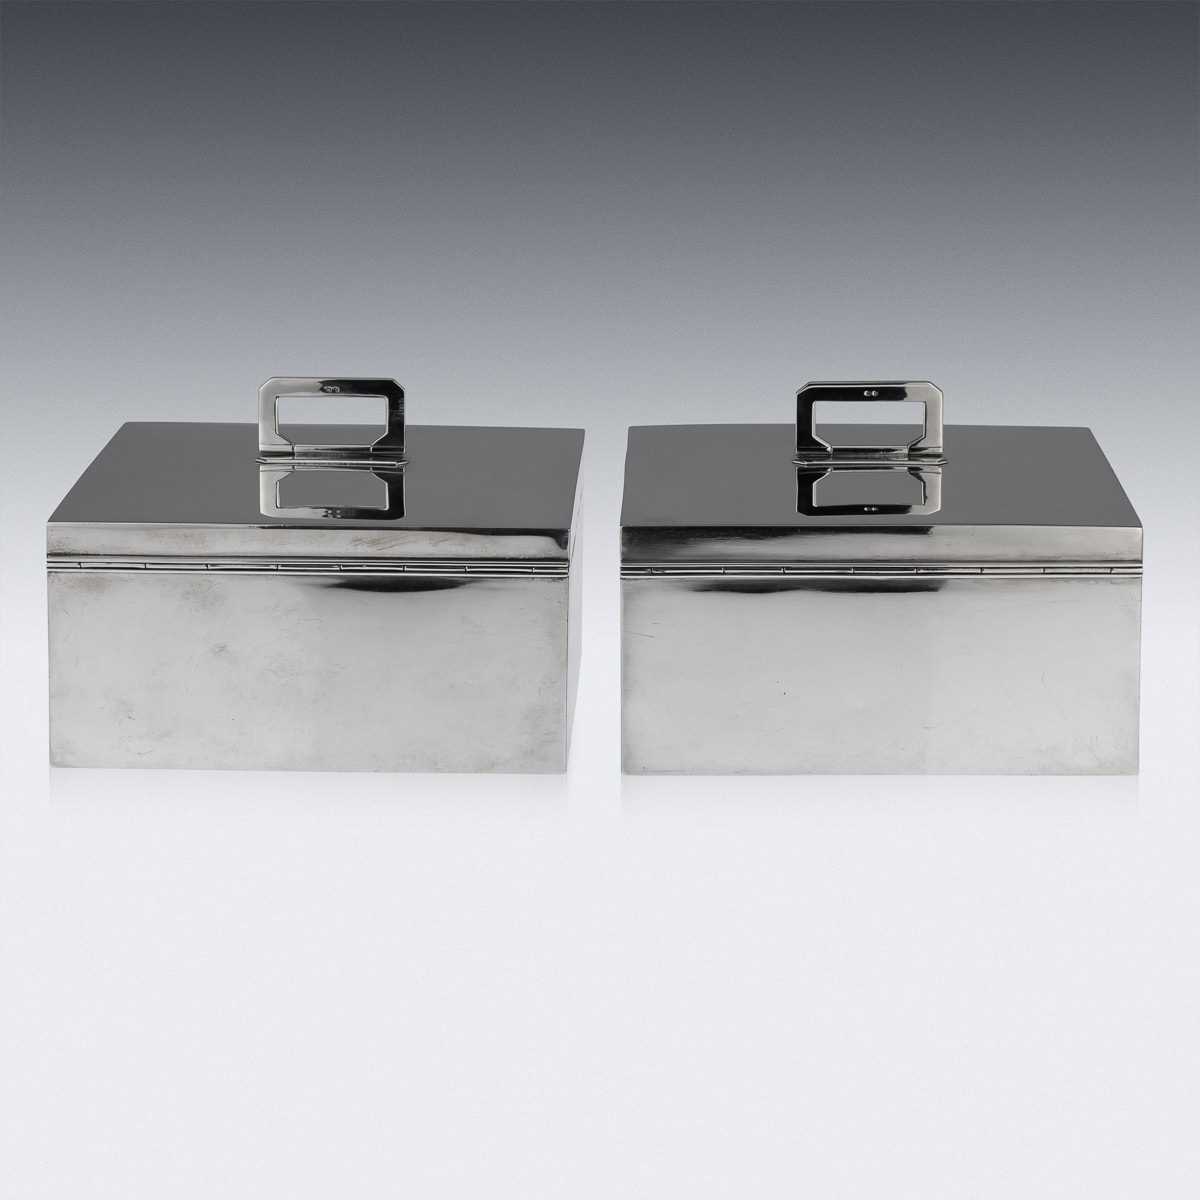 ASPREY & CO. : A PAIR OF STERLING SILVER ART DECO CIGAR BOXES, C. 1936 - Image 4 of 14